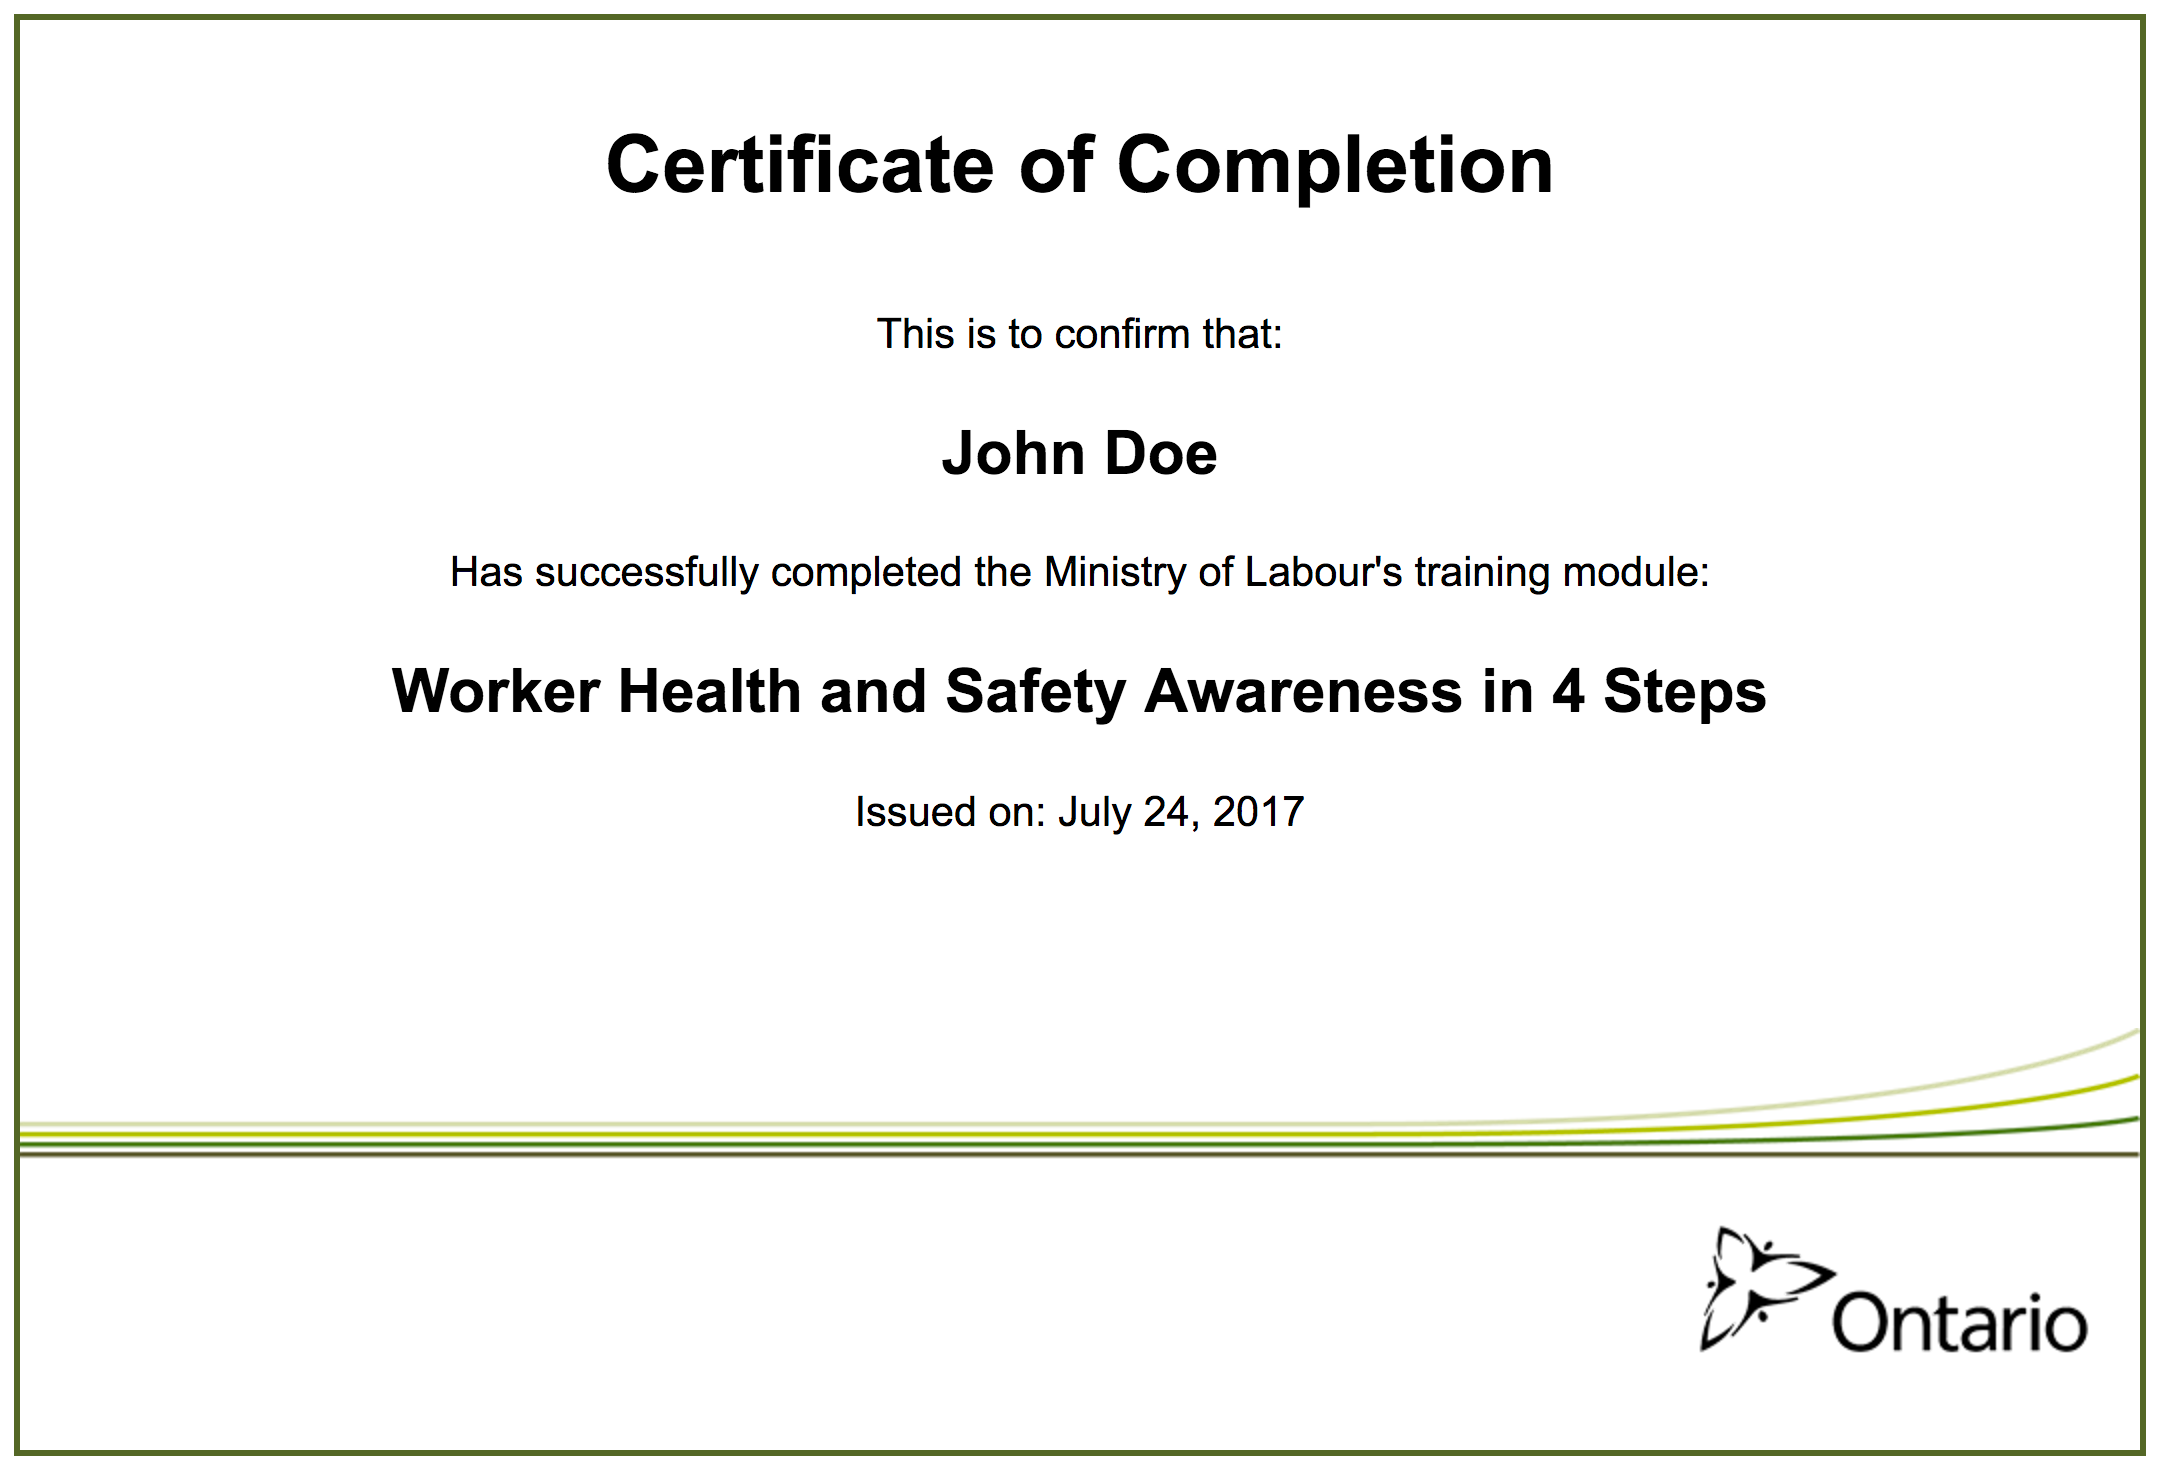 Worker Health and Safety Awareness In 4 Steps certificate